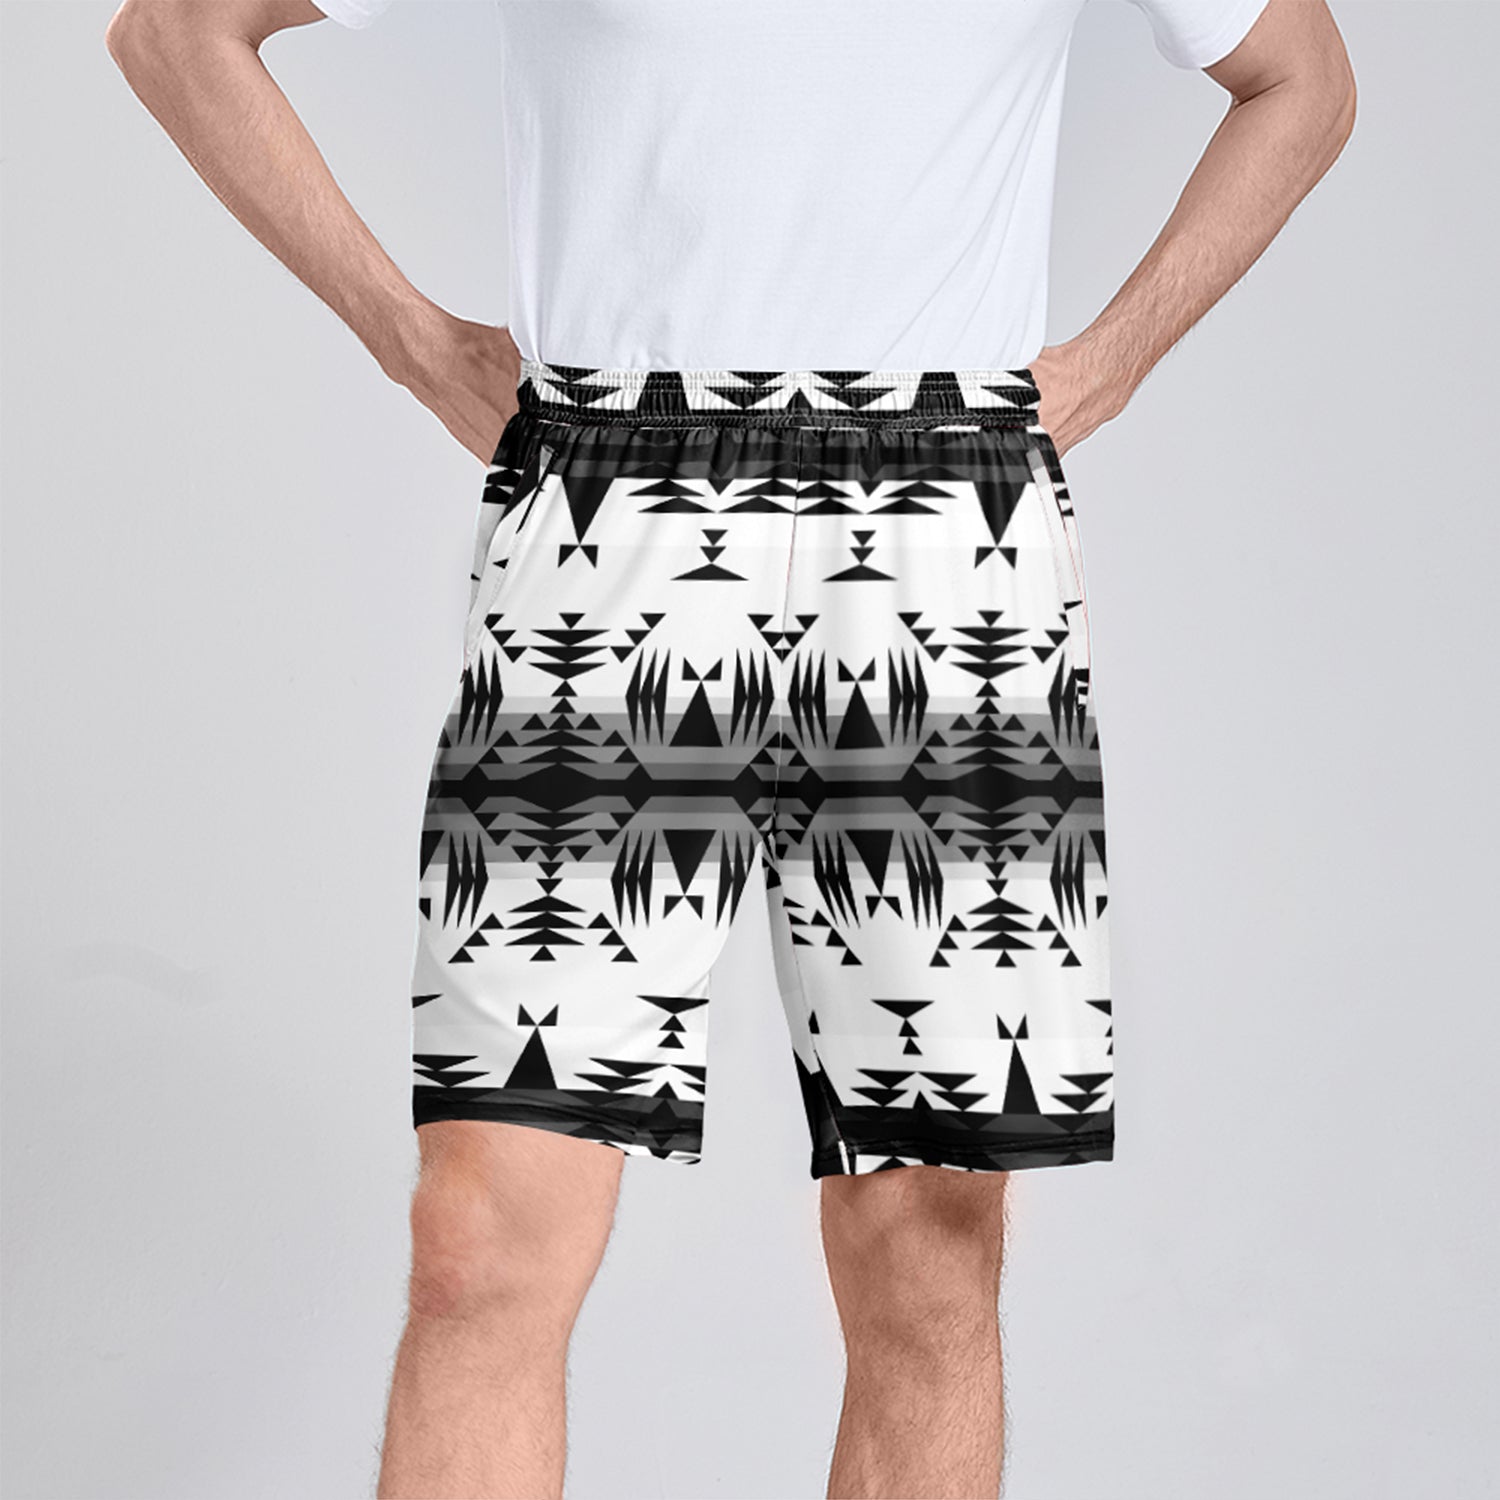 Between the Mountains White and Black Athletic Shorts with Pockets